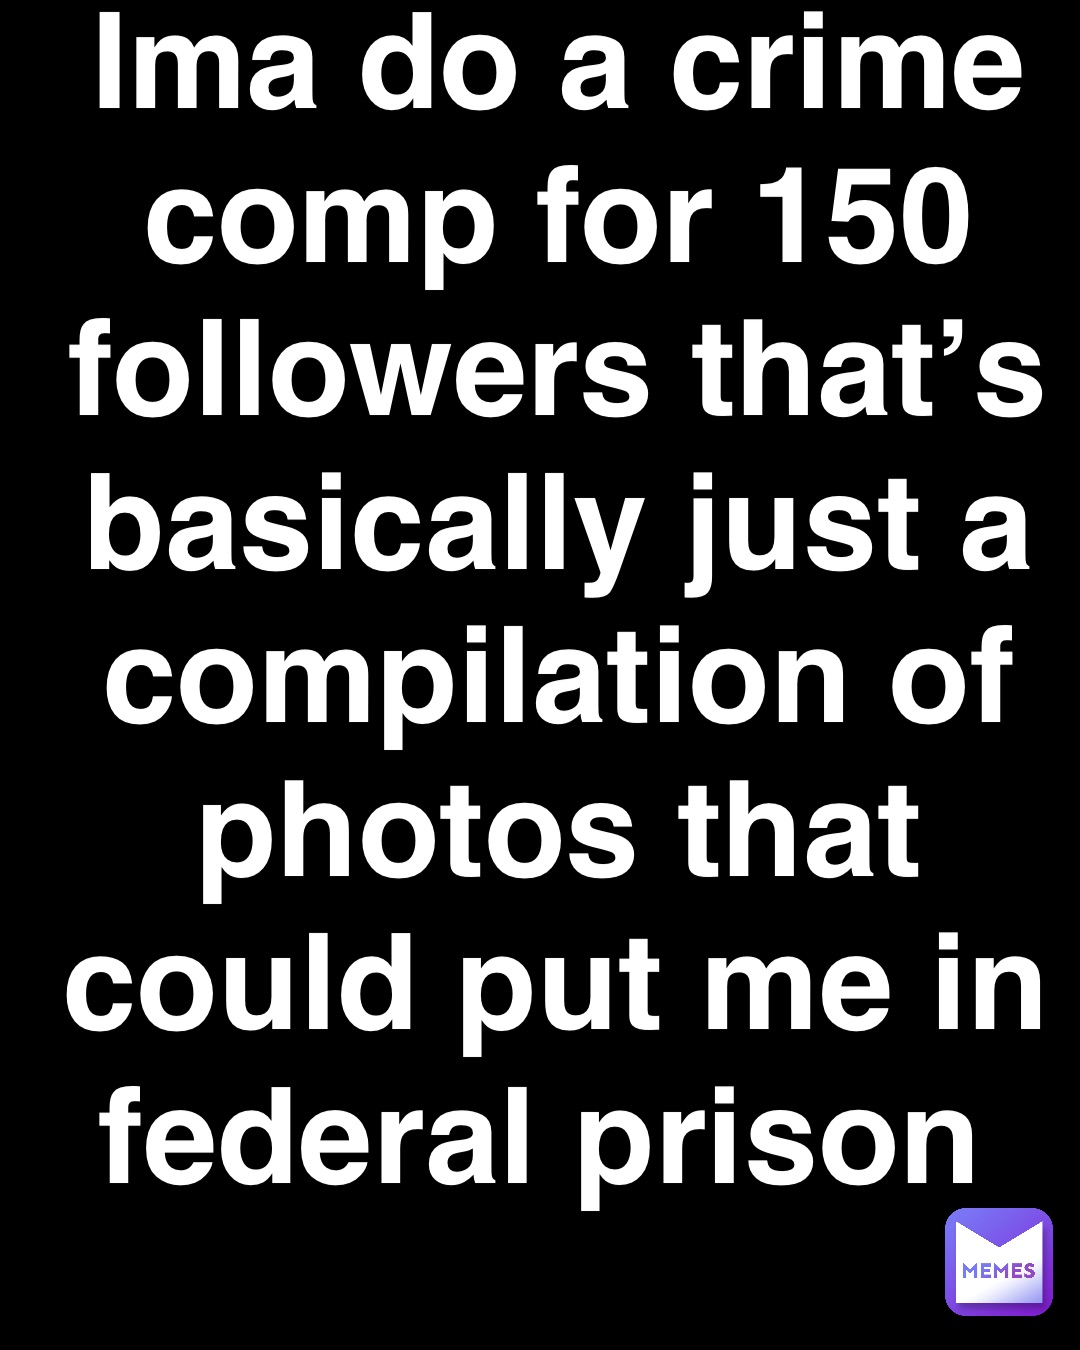 Double tap to edit Ima do a crime comp for 150 followers that’s basically just a compilation of photos that could put me in federal prison